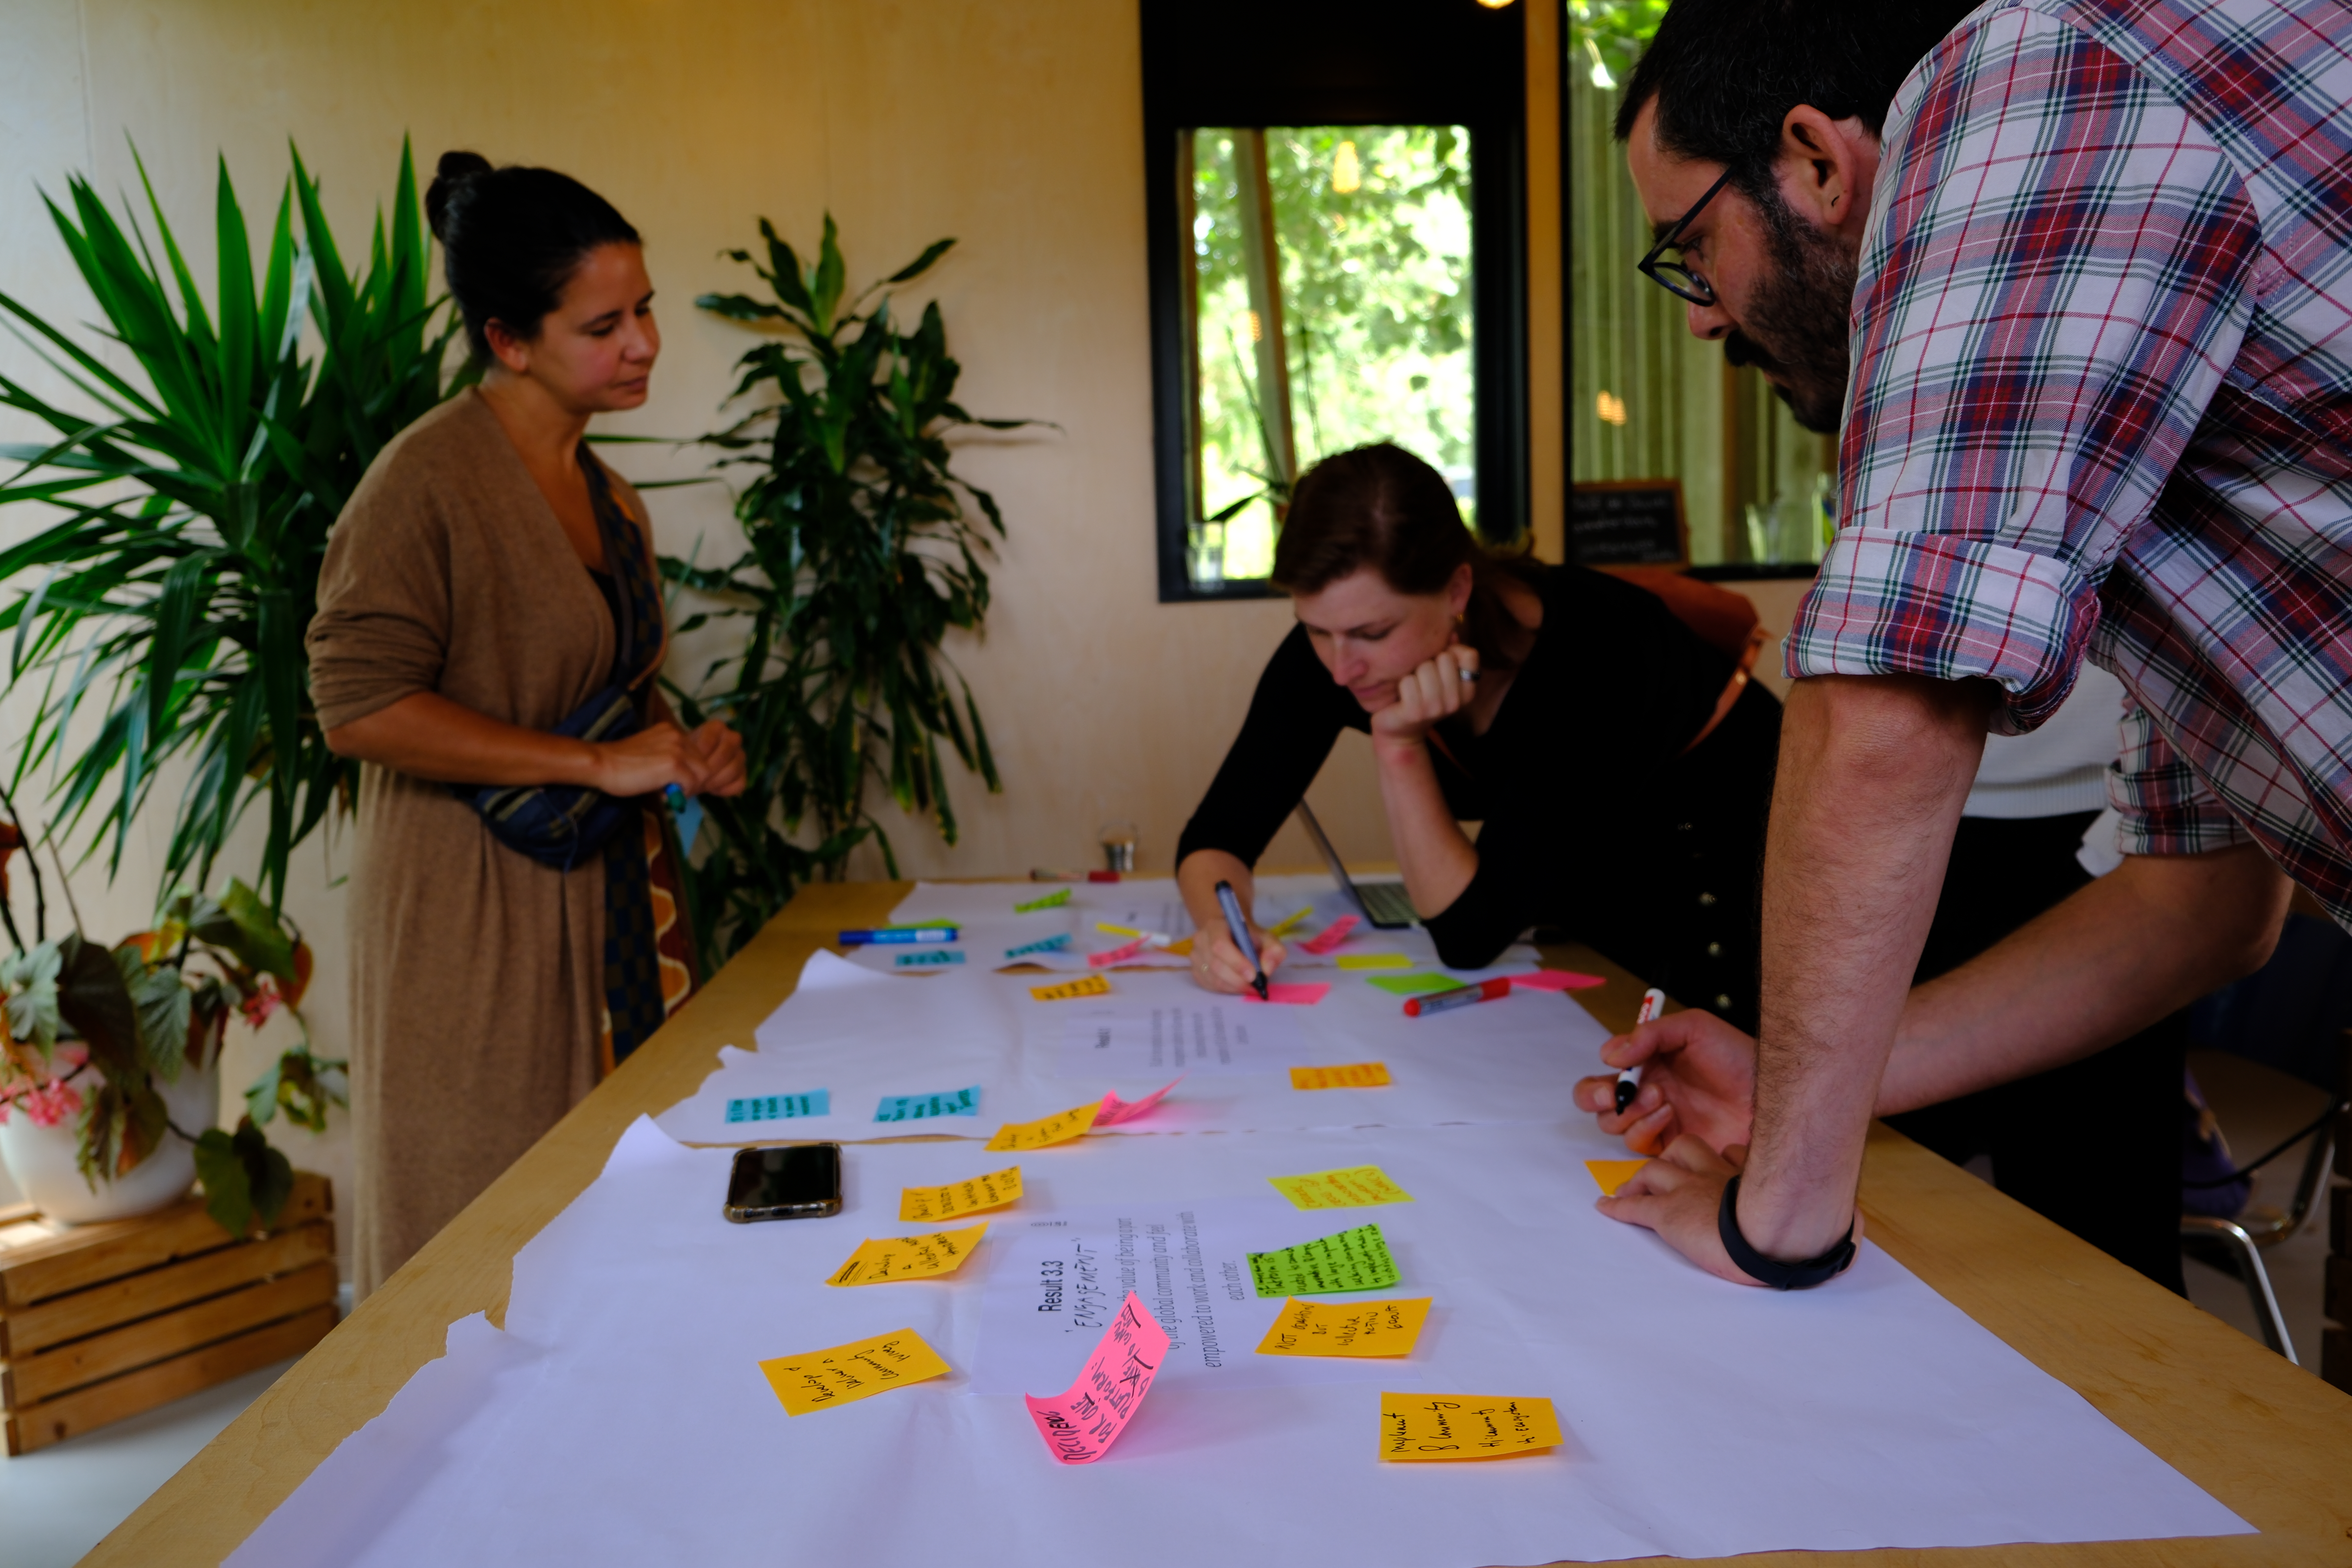 The team of B Lab Europe brainstorming with post-its to develop a new Strategy